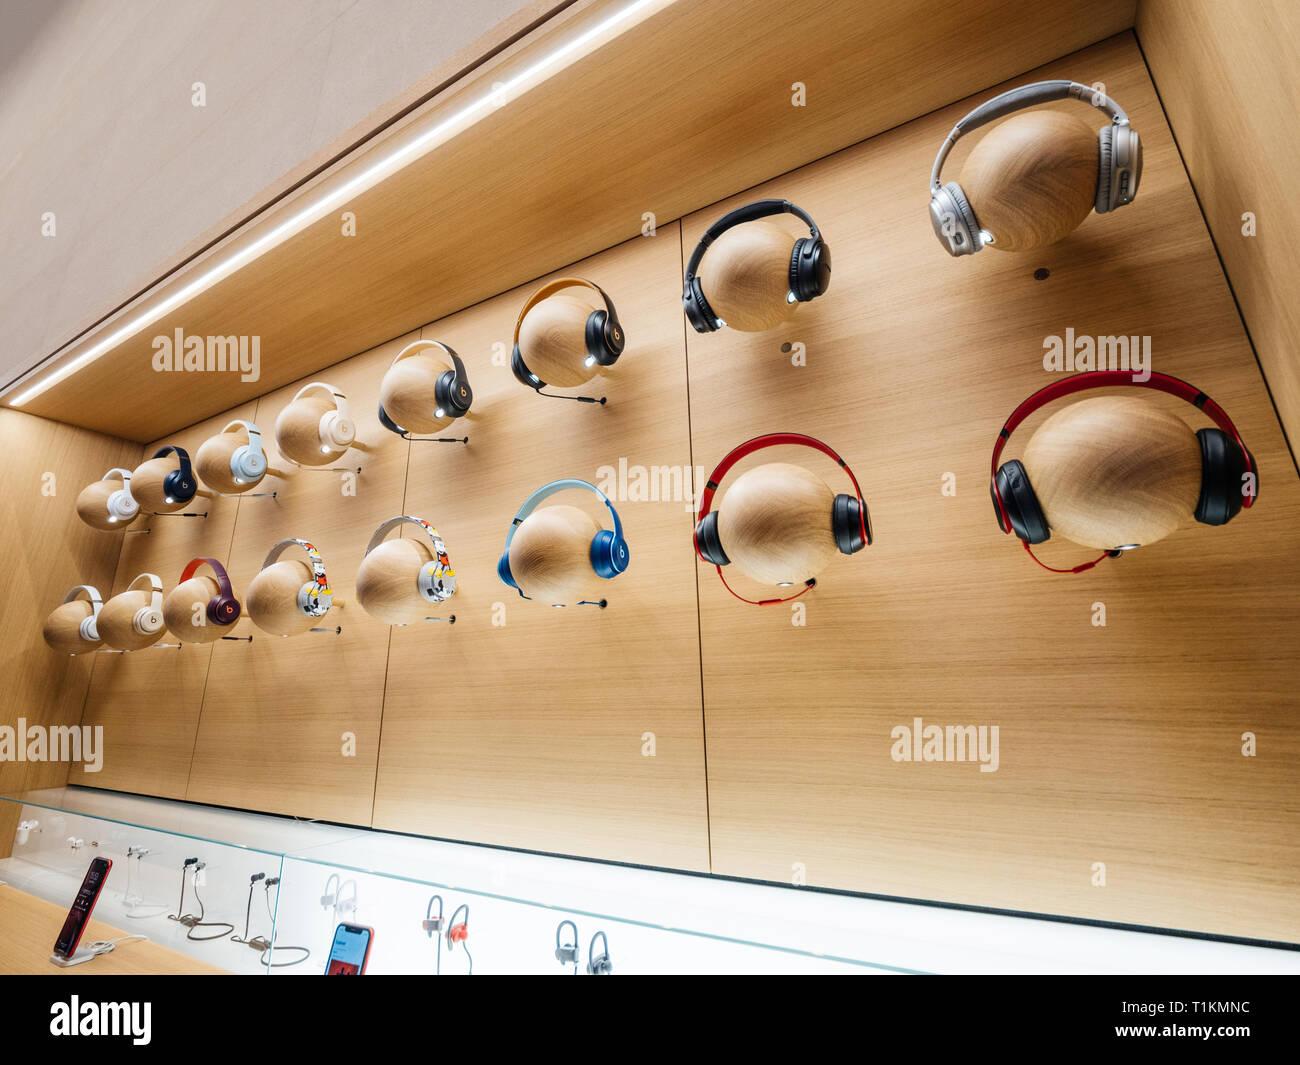 Paris, France - Mar 19 2019: Multiple Audio headphones Beats bu Dr Dre Apple products on mannequin heads are displayed inside the new Apple Store Champs-Elysees  Stock Photo